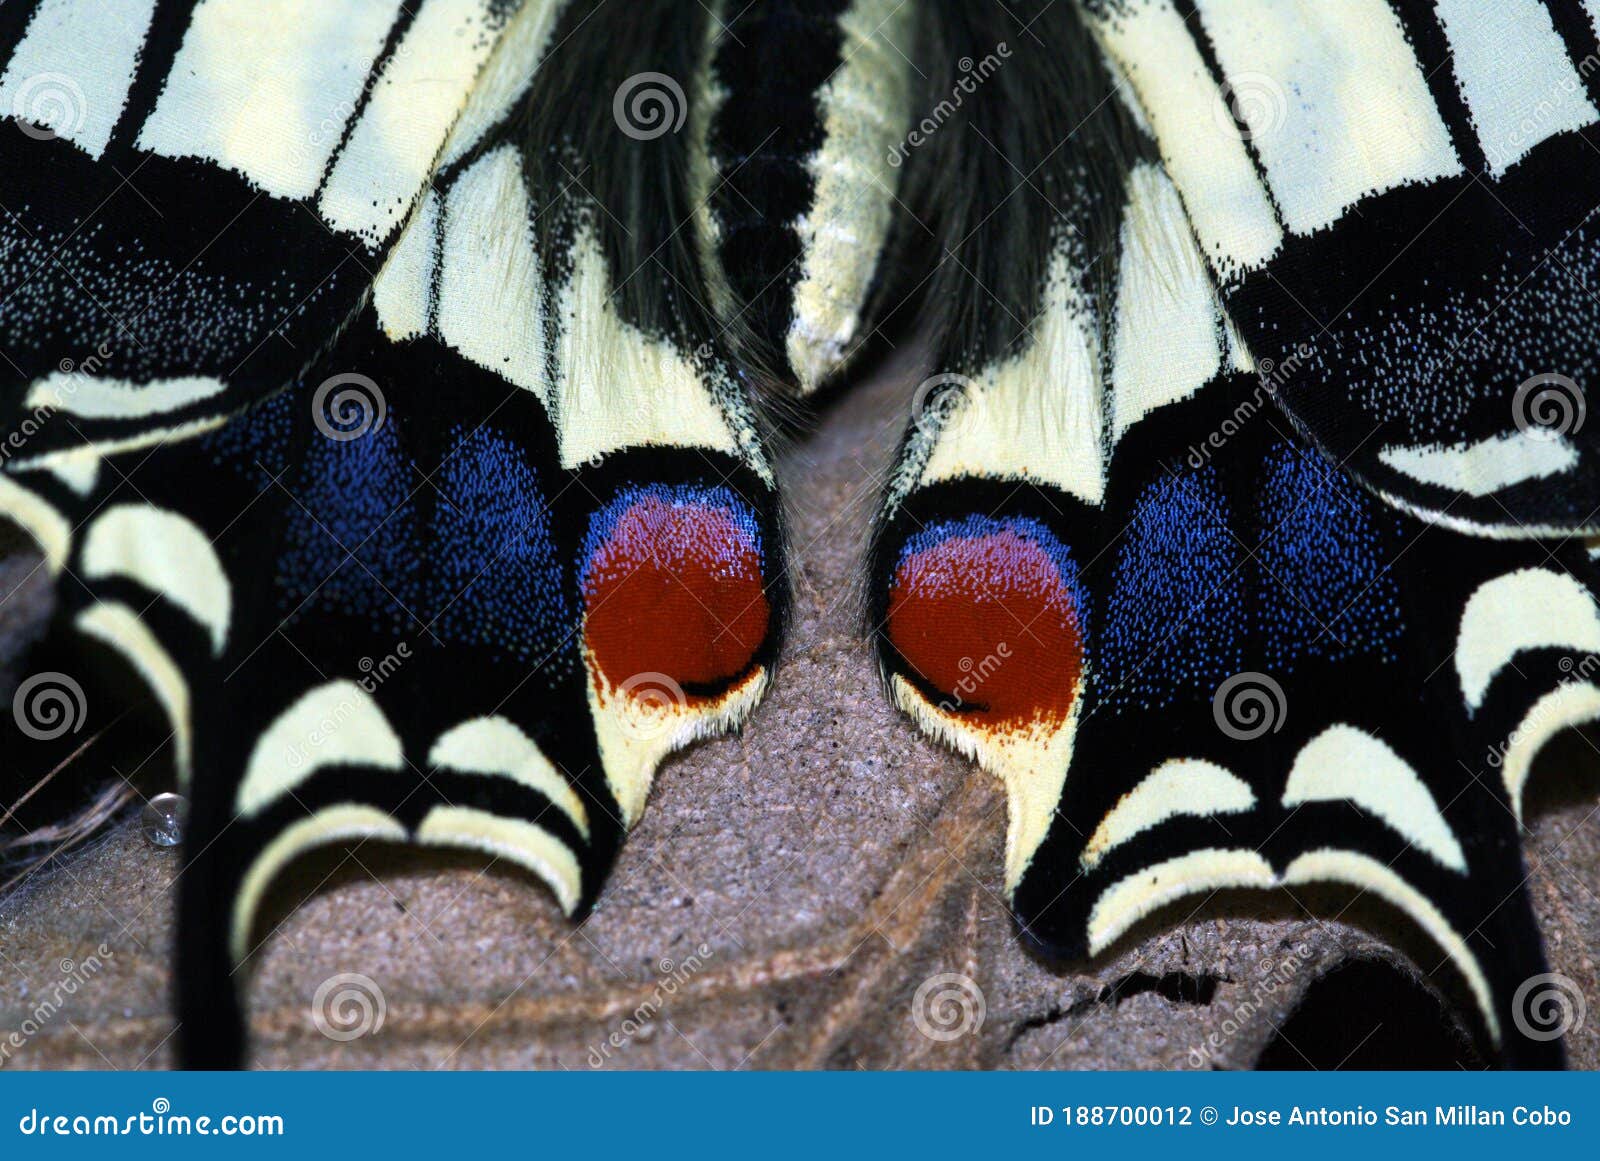 the most beautiful butterfly in spain and europe, papilio macaon